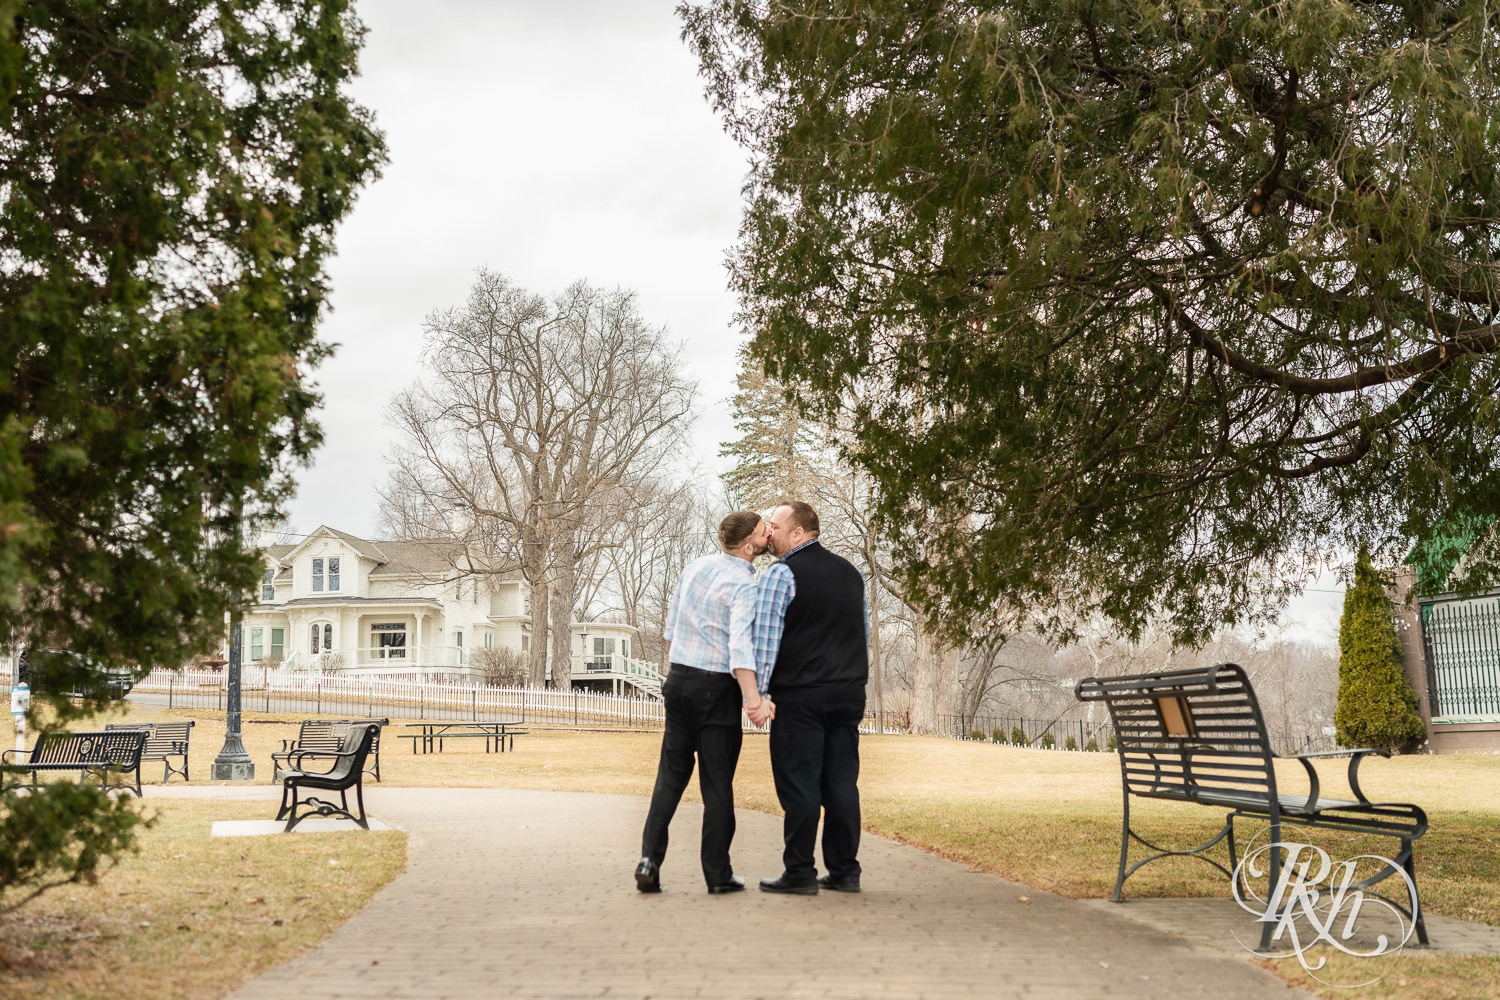 Two men in plaid shirts kiss during engagement photography at Pioneer Park in Stillwater, Minnesota.